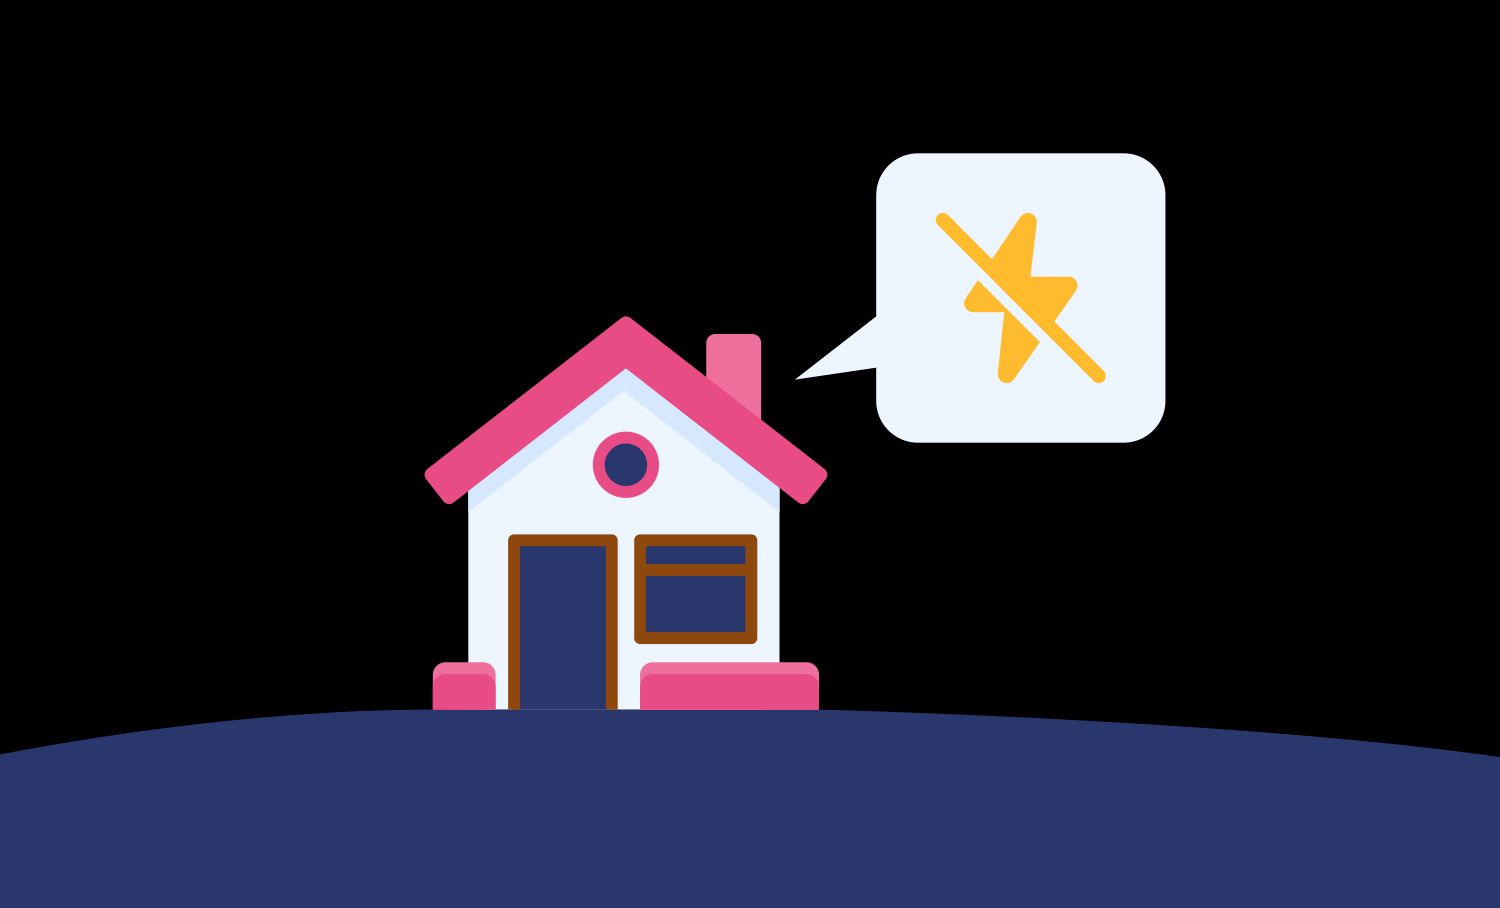 Illustration of a house with the power out and a power failure icon beside it